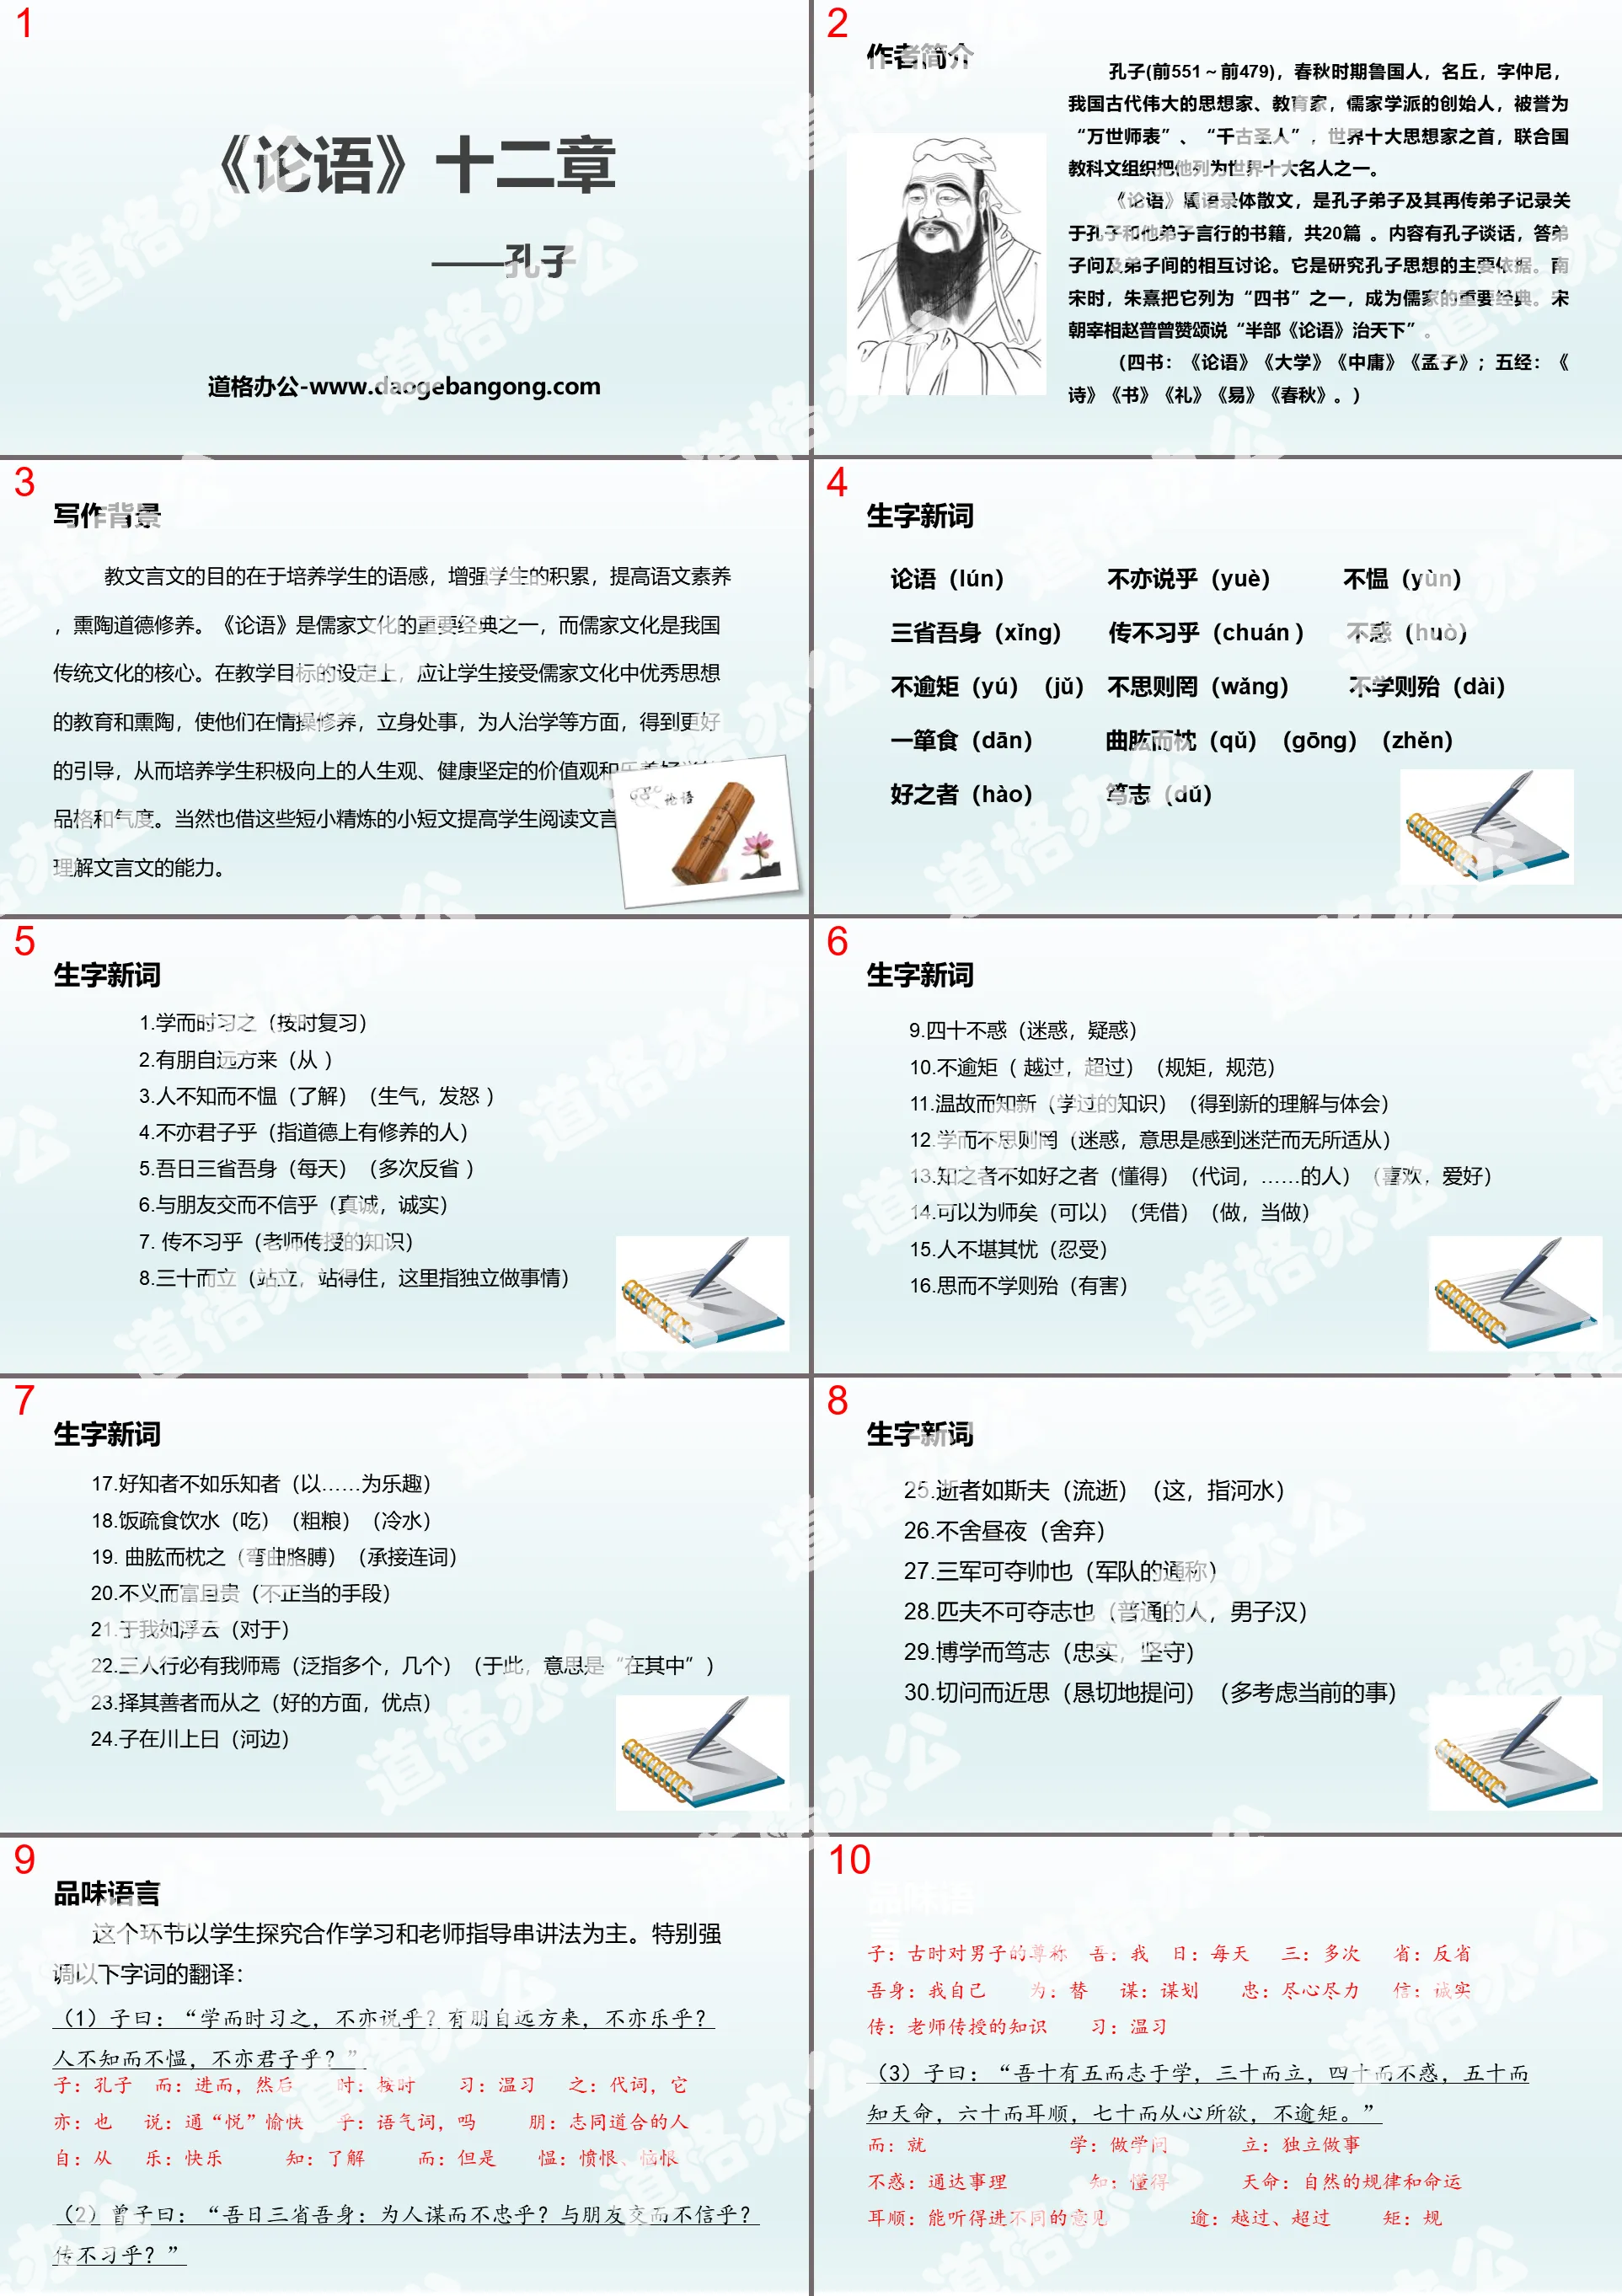 "Twelve Chapters of The Analects of Confucius" PPT courseware download